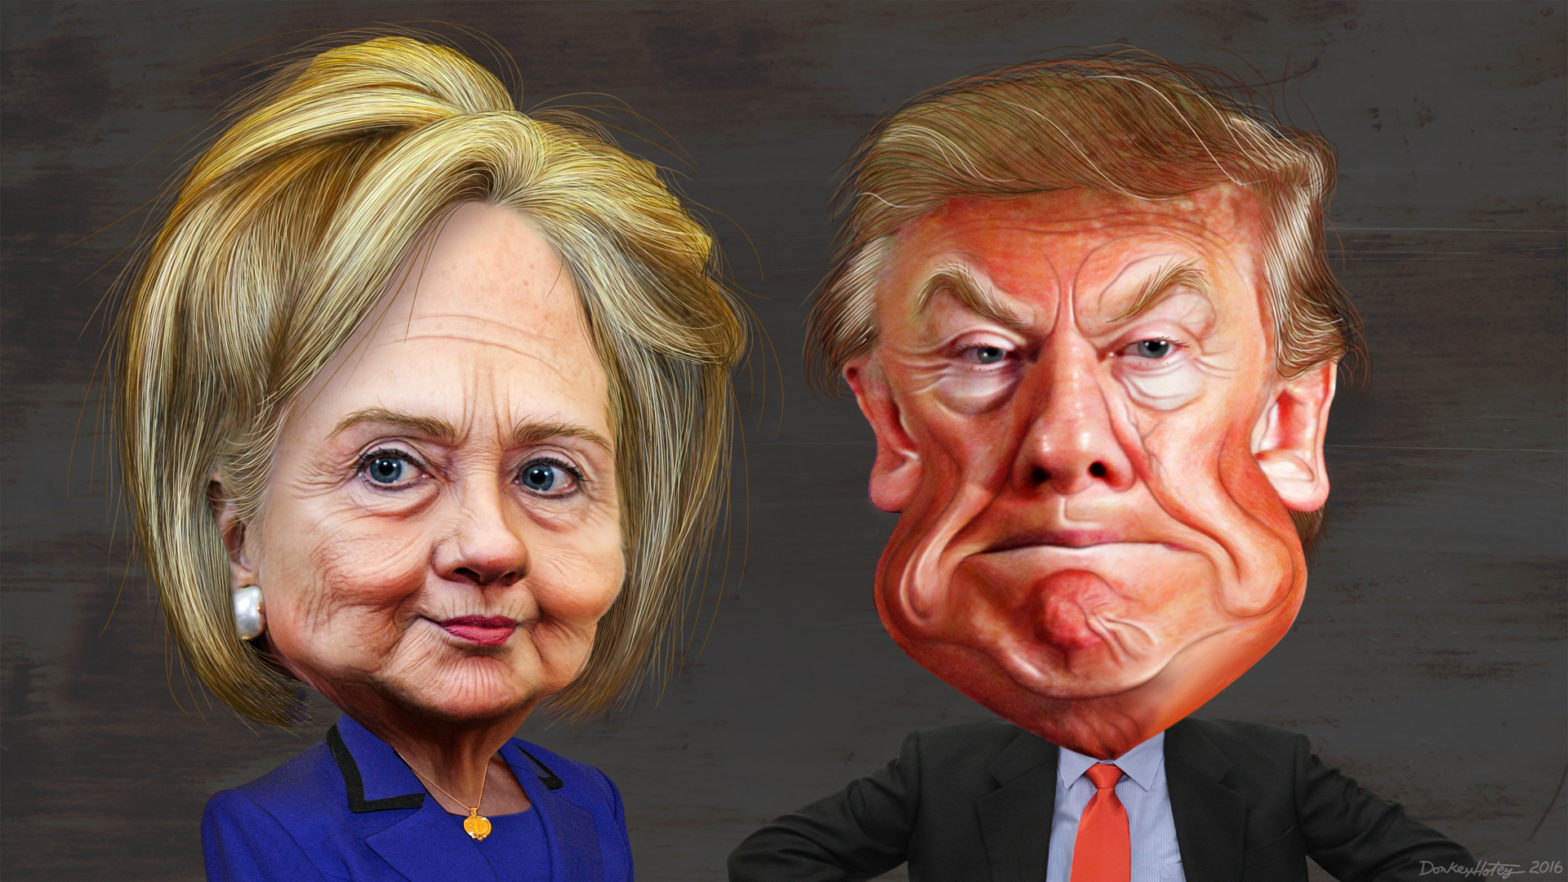 caricatures of Hillary Clinton and Donald Trump